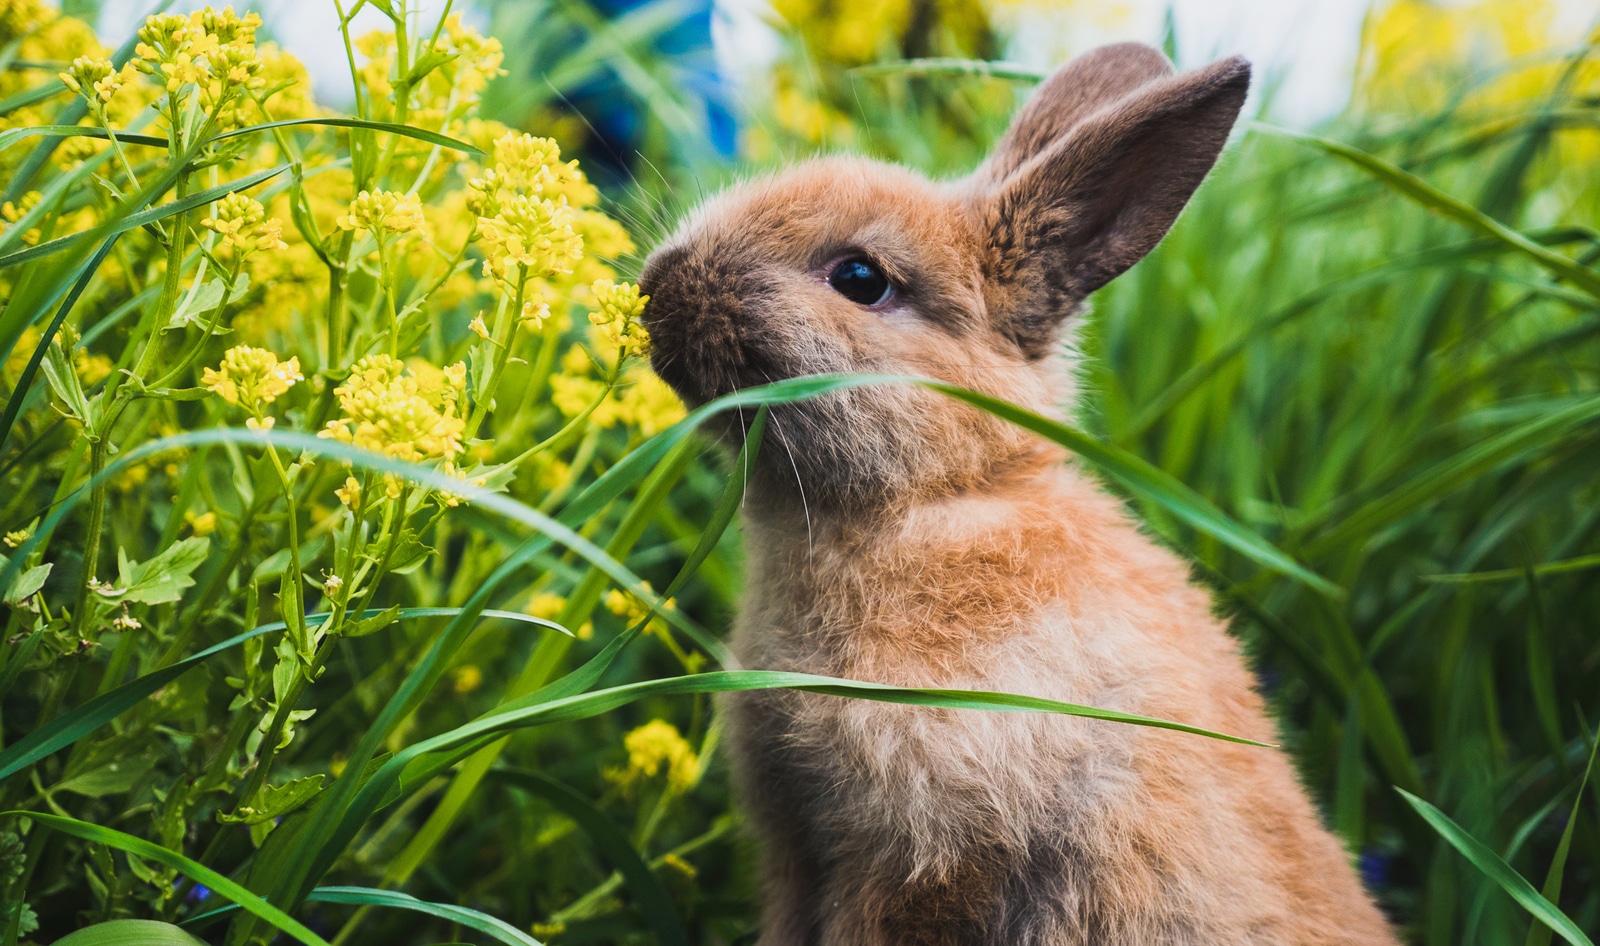 Easter or Not, Bunnies Deserve Better. Here’s Why You Shouldn’t Exploit or Eat Them.